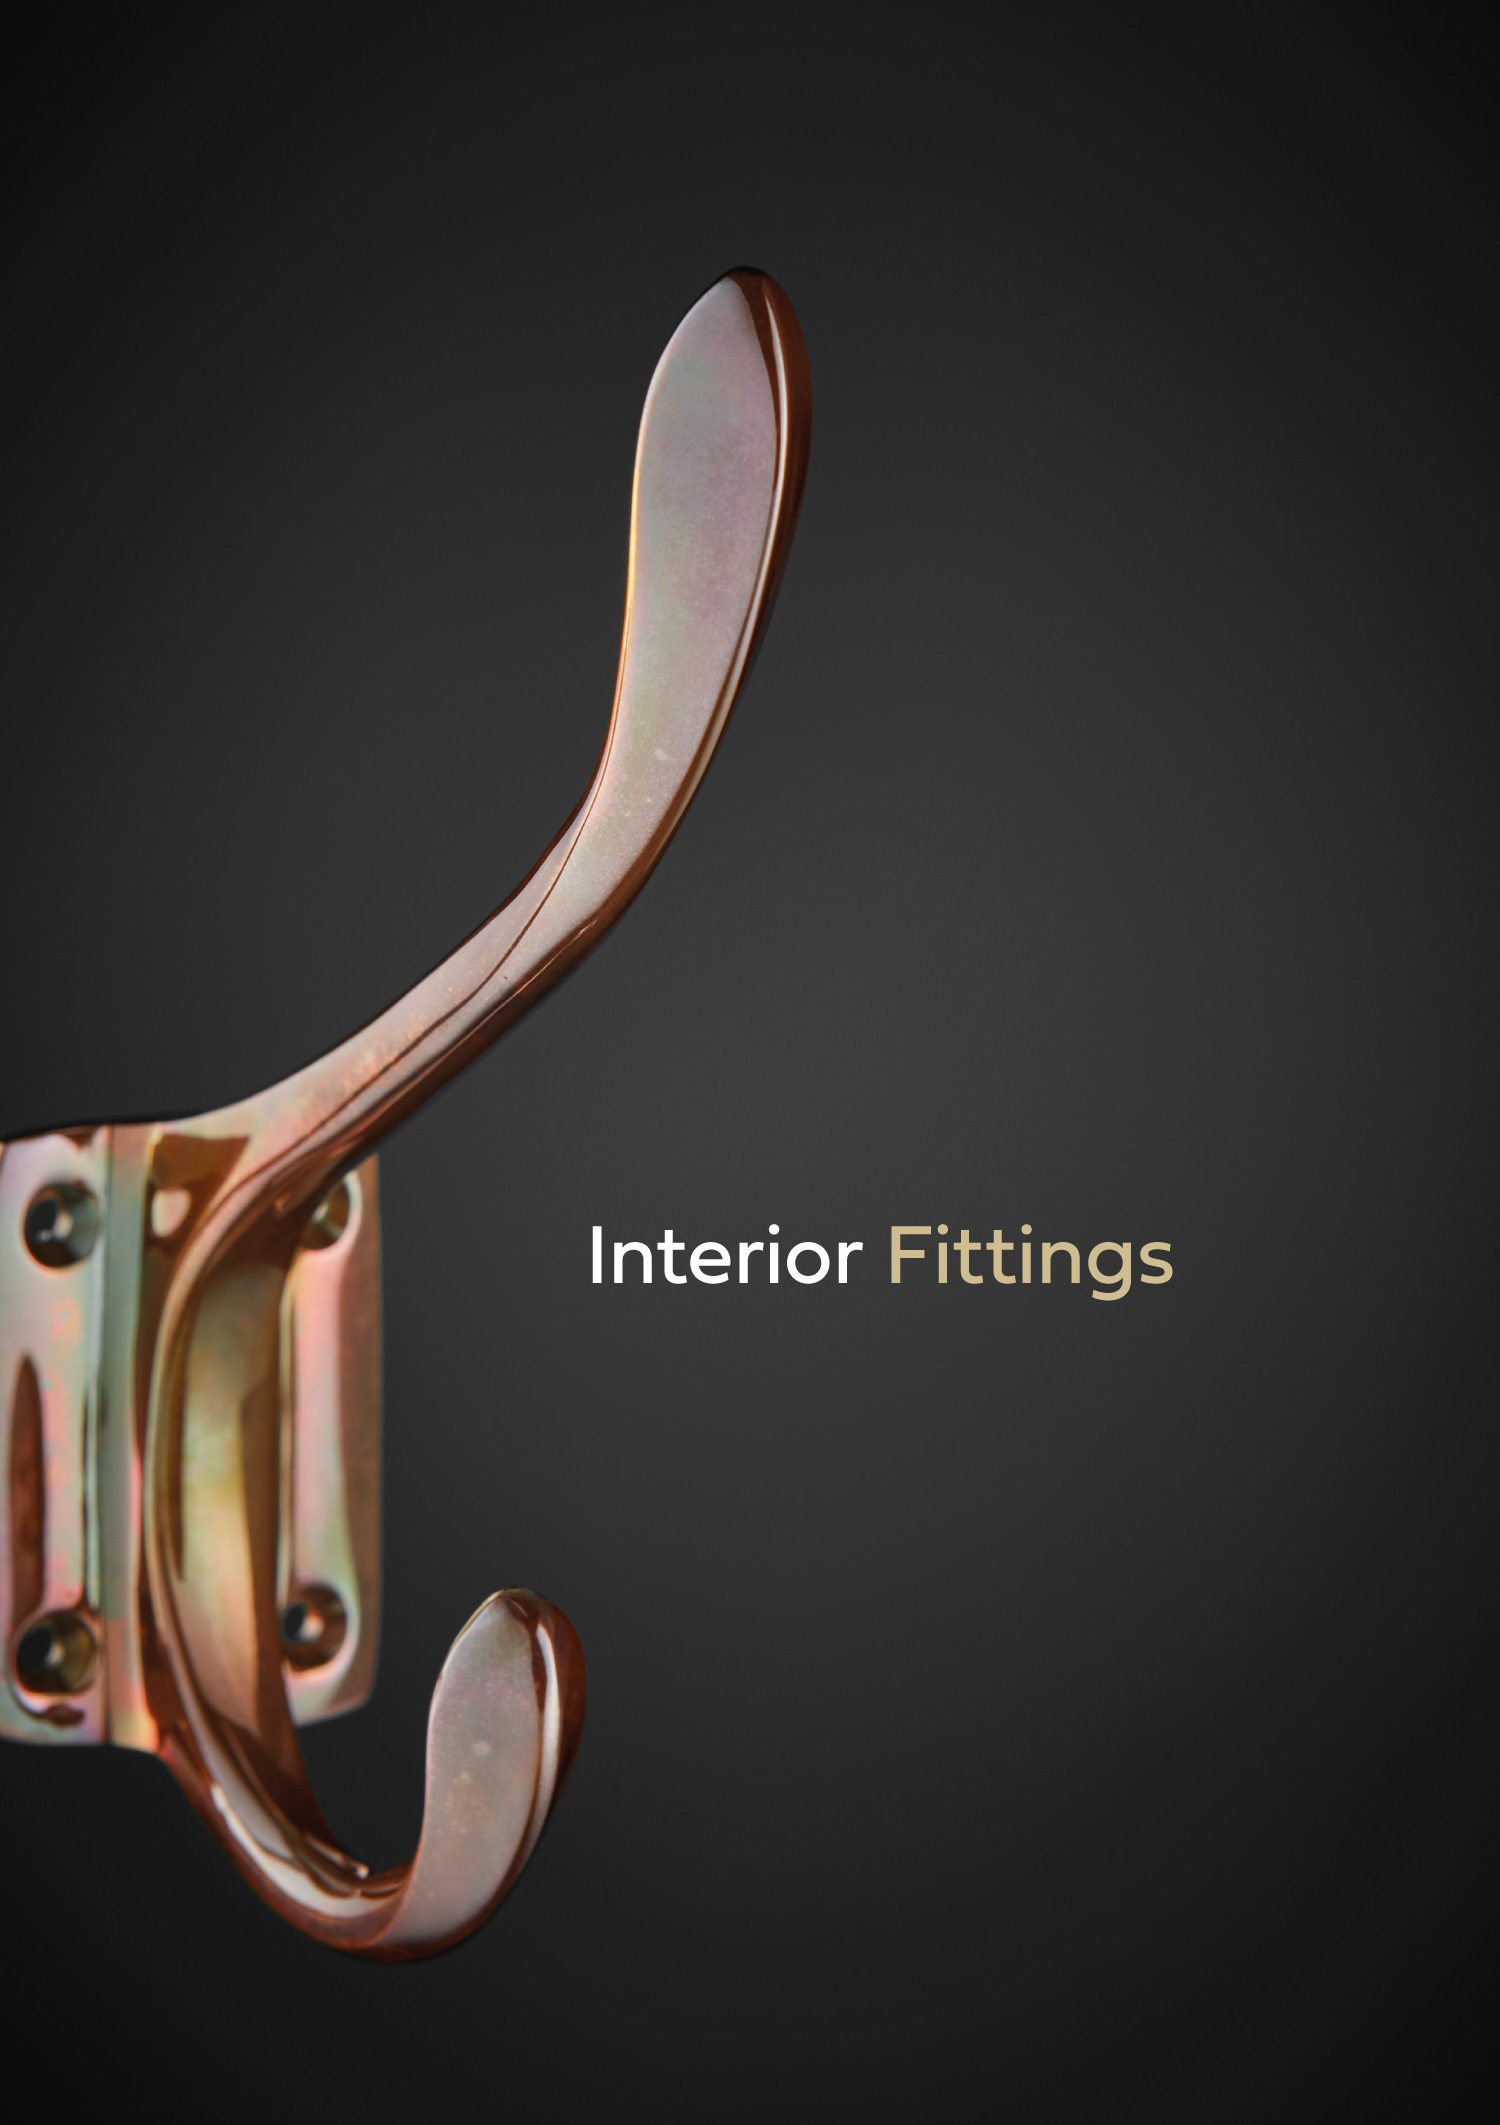 Interior fittings brochure by Croft